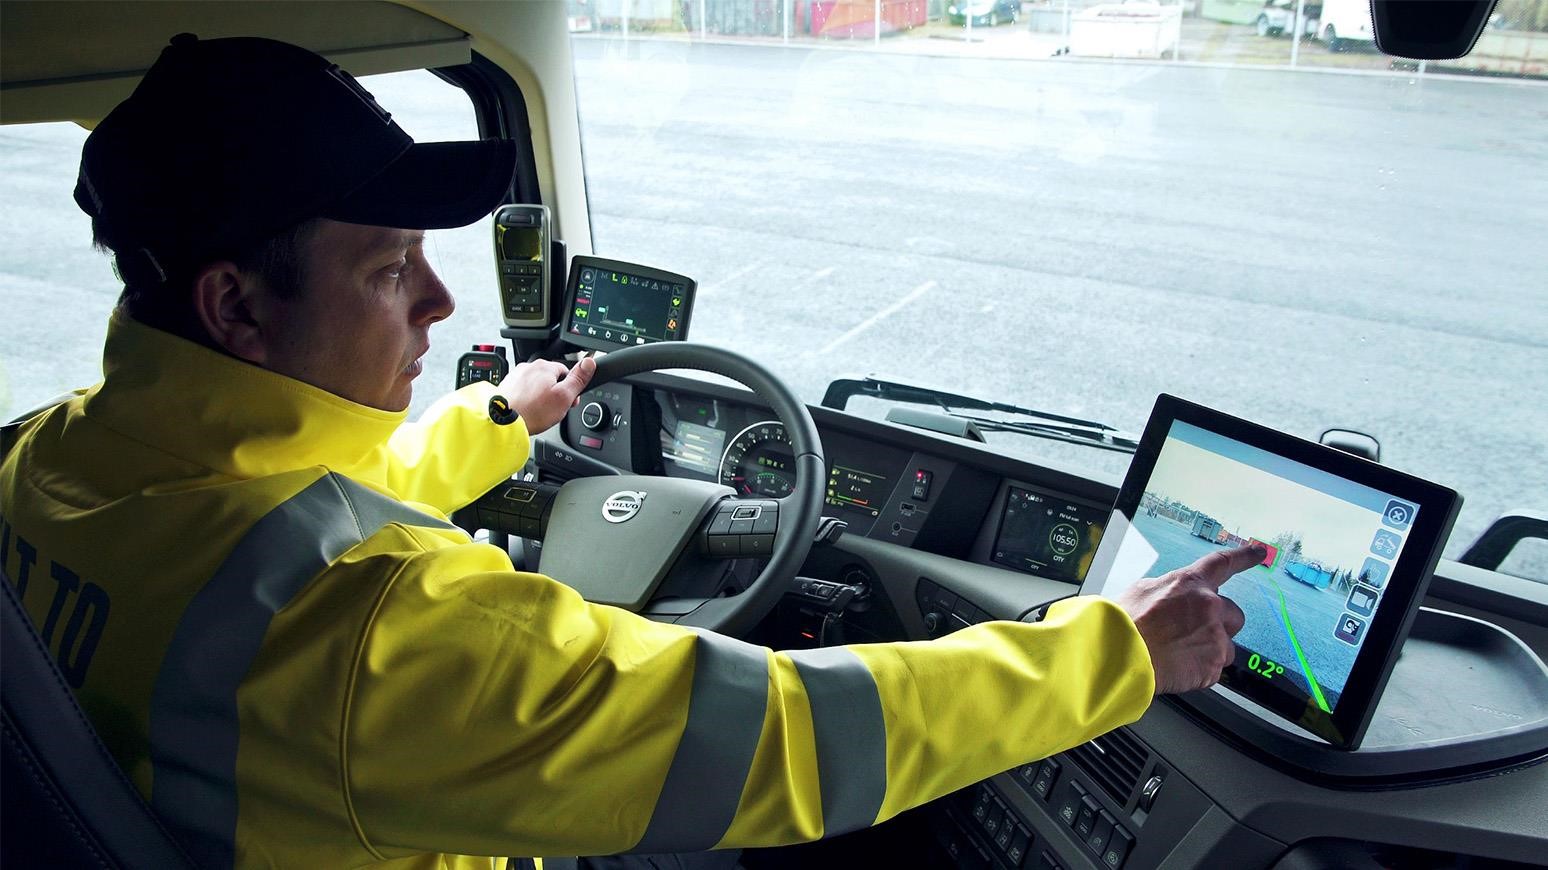 Hiab To Feature HiVision Augmented Reality Hooklift Assistance Feature At Transport-Logistics 2019